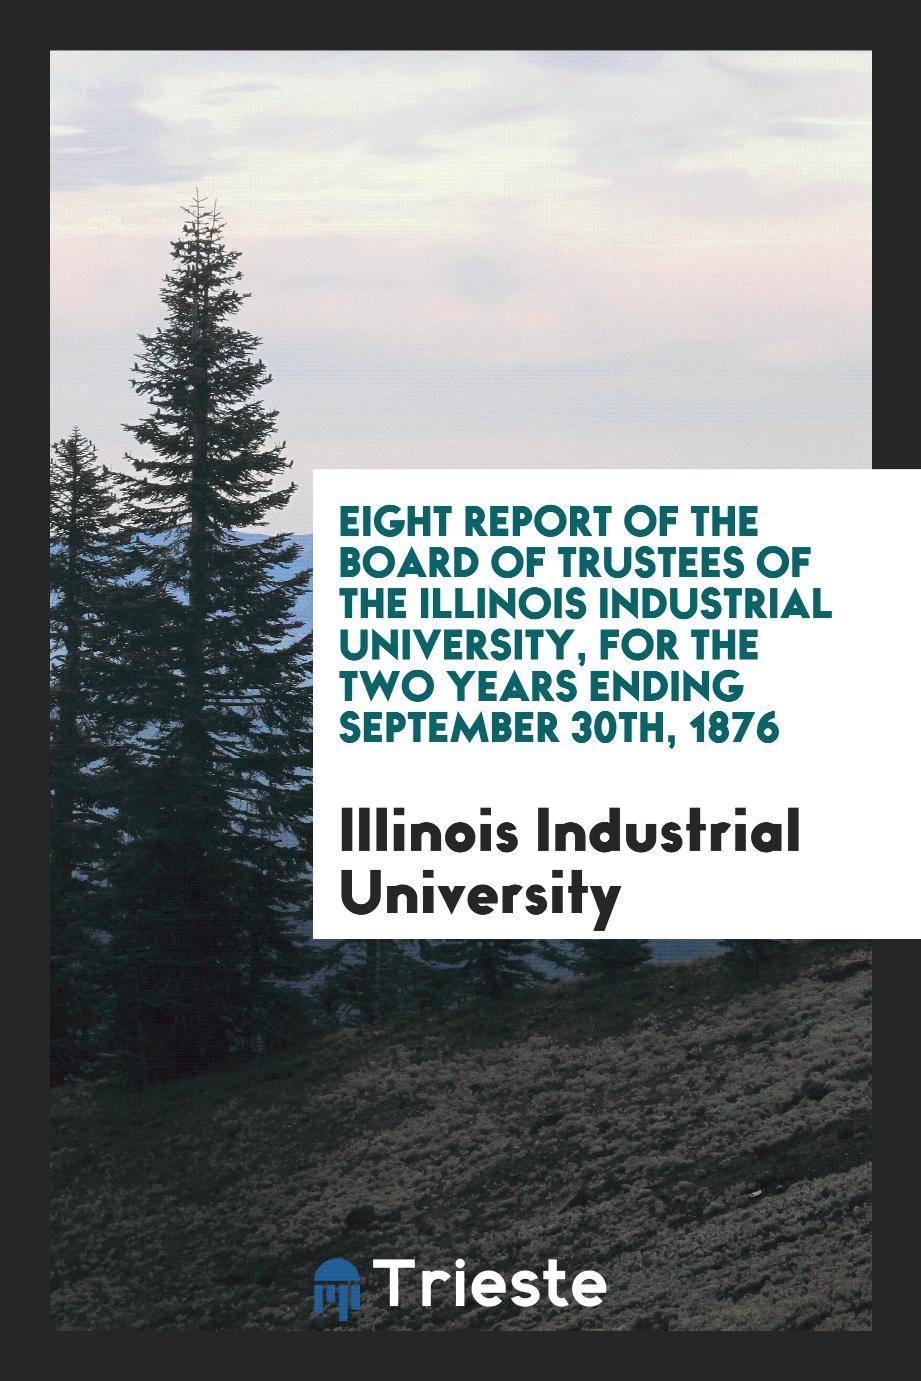 Eight Report of the Board of Trustees of the Illinois Industrial University, for the Two Years Ending September 30th, 1876